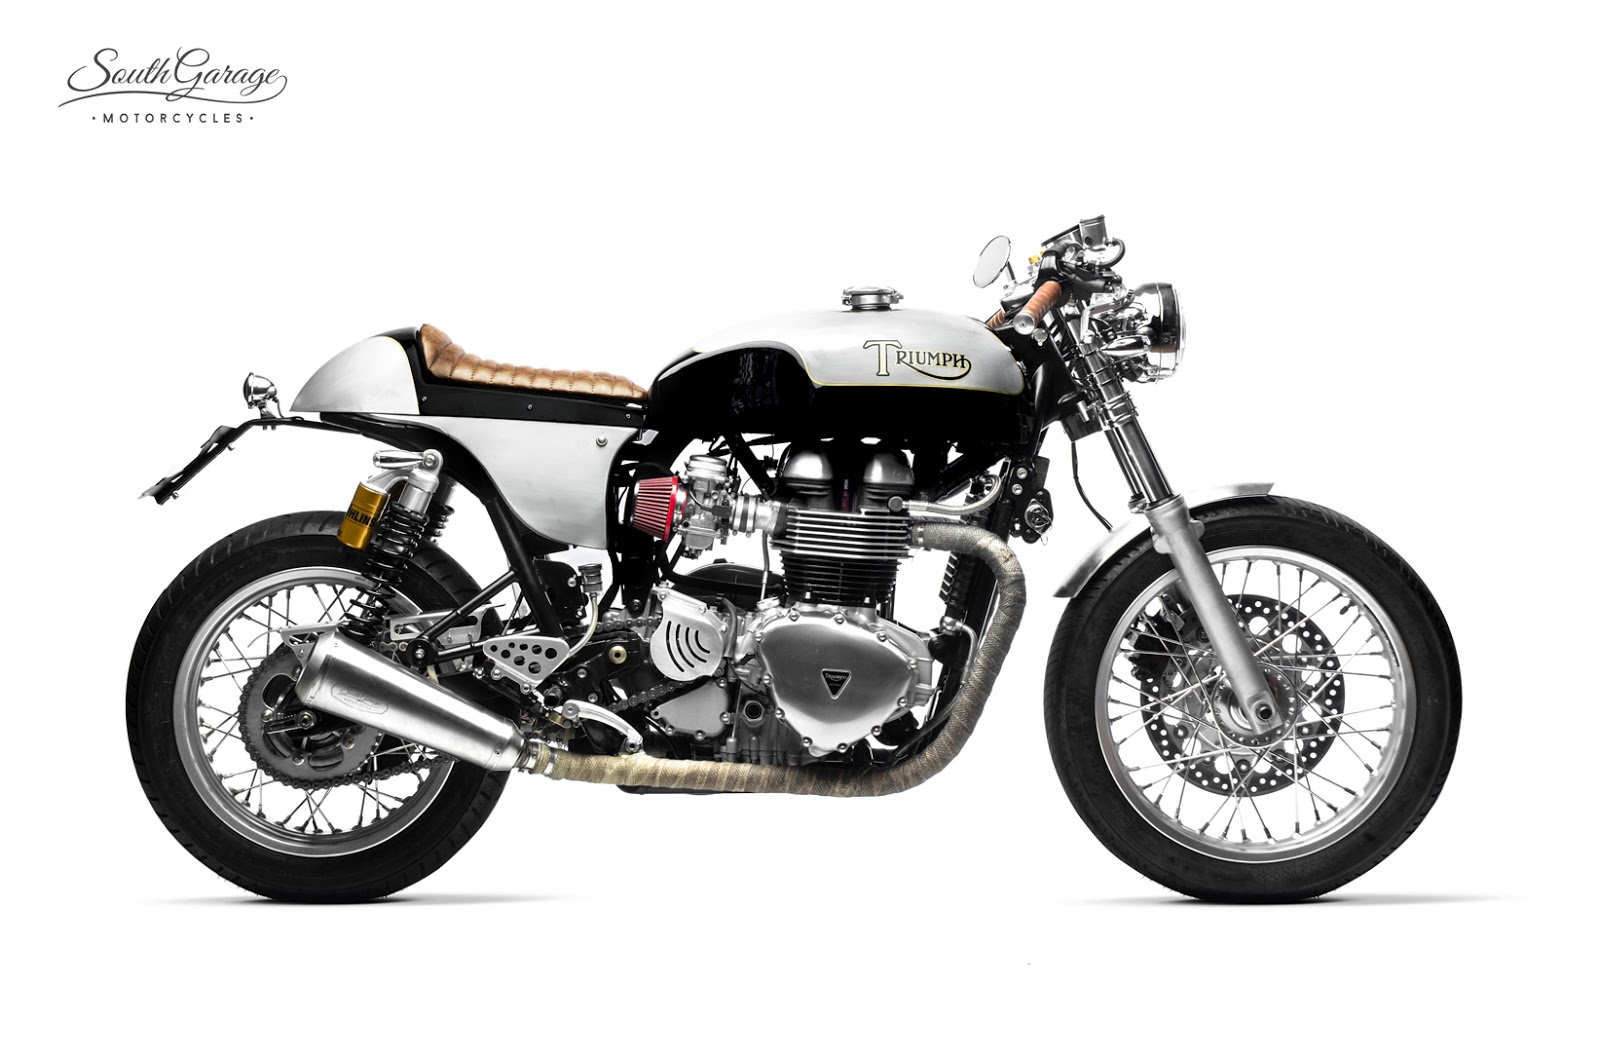 Motorcycle Modification Triumph Lyta By South Garage Motorcycles